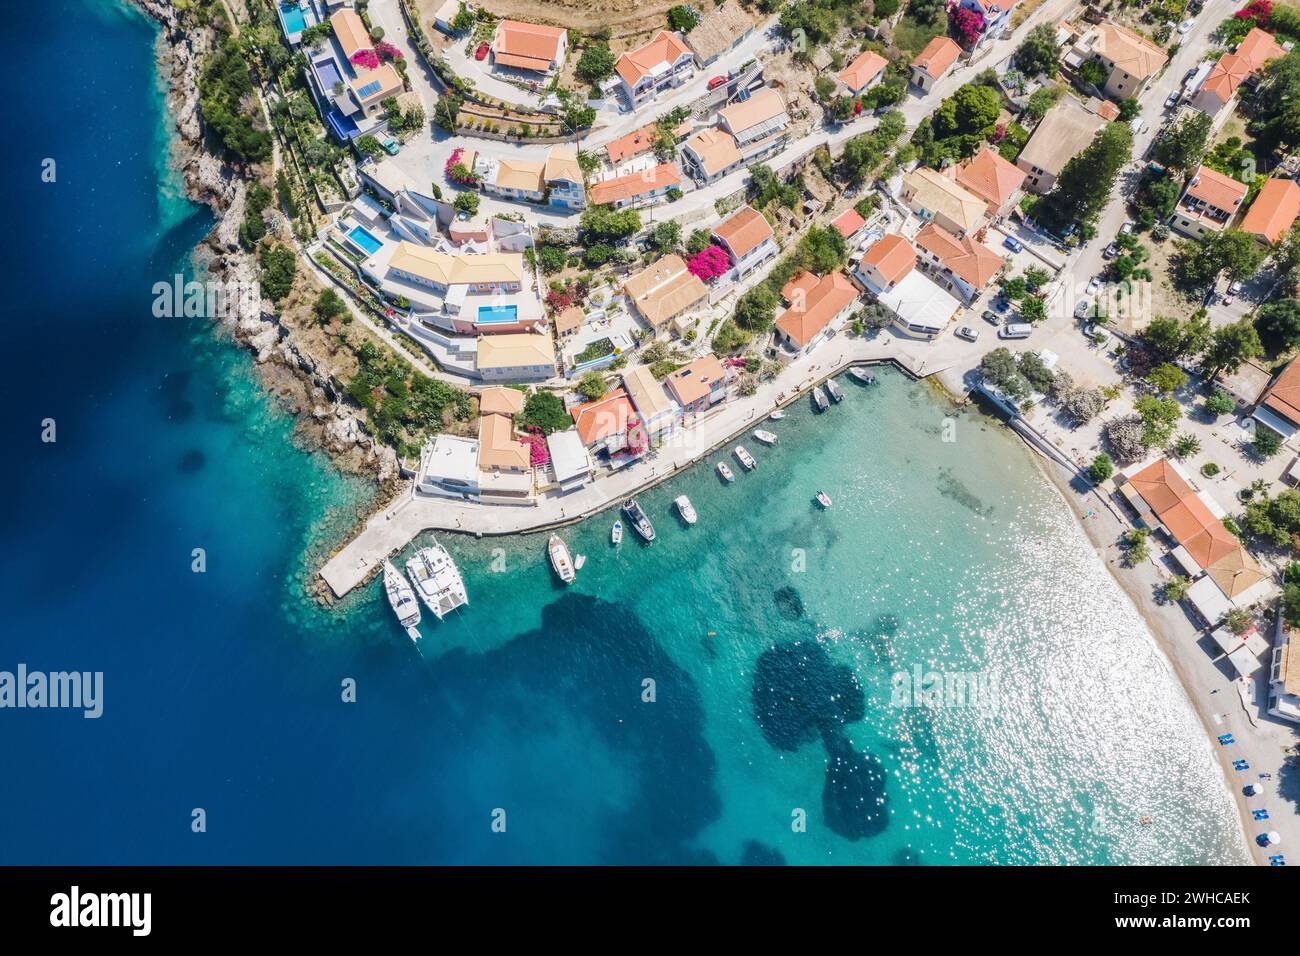 Assos picturesque fishing village from above, Kefalonia, Greece. Aerial drone view. Sailing boats moored in turquoise bay. Stock Photo